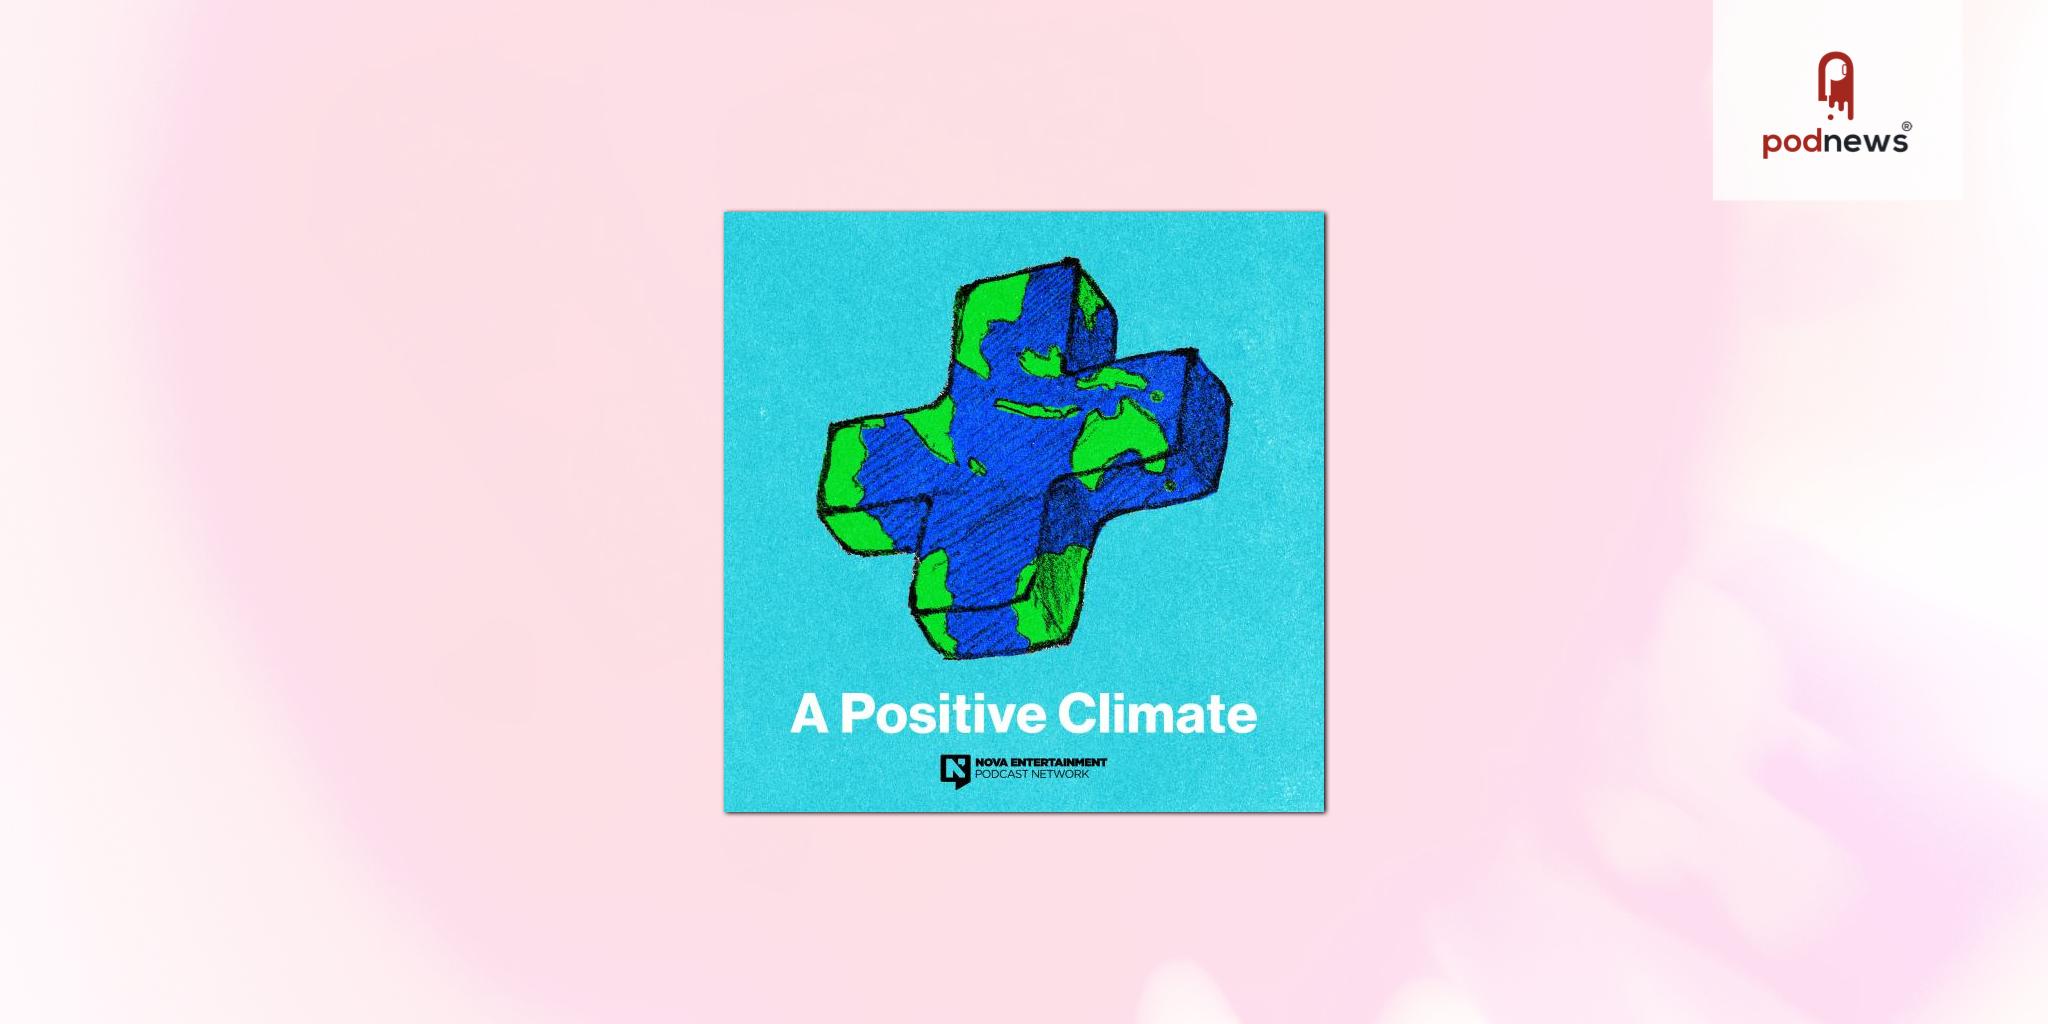 A Positive Climate podcast flips the script on climate change